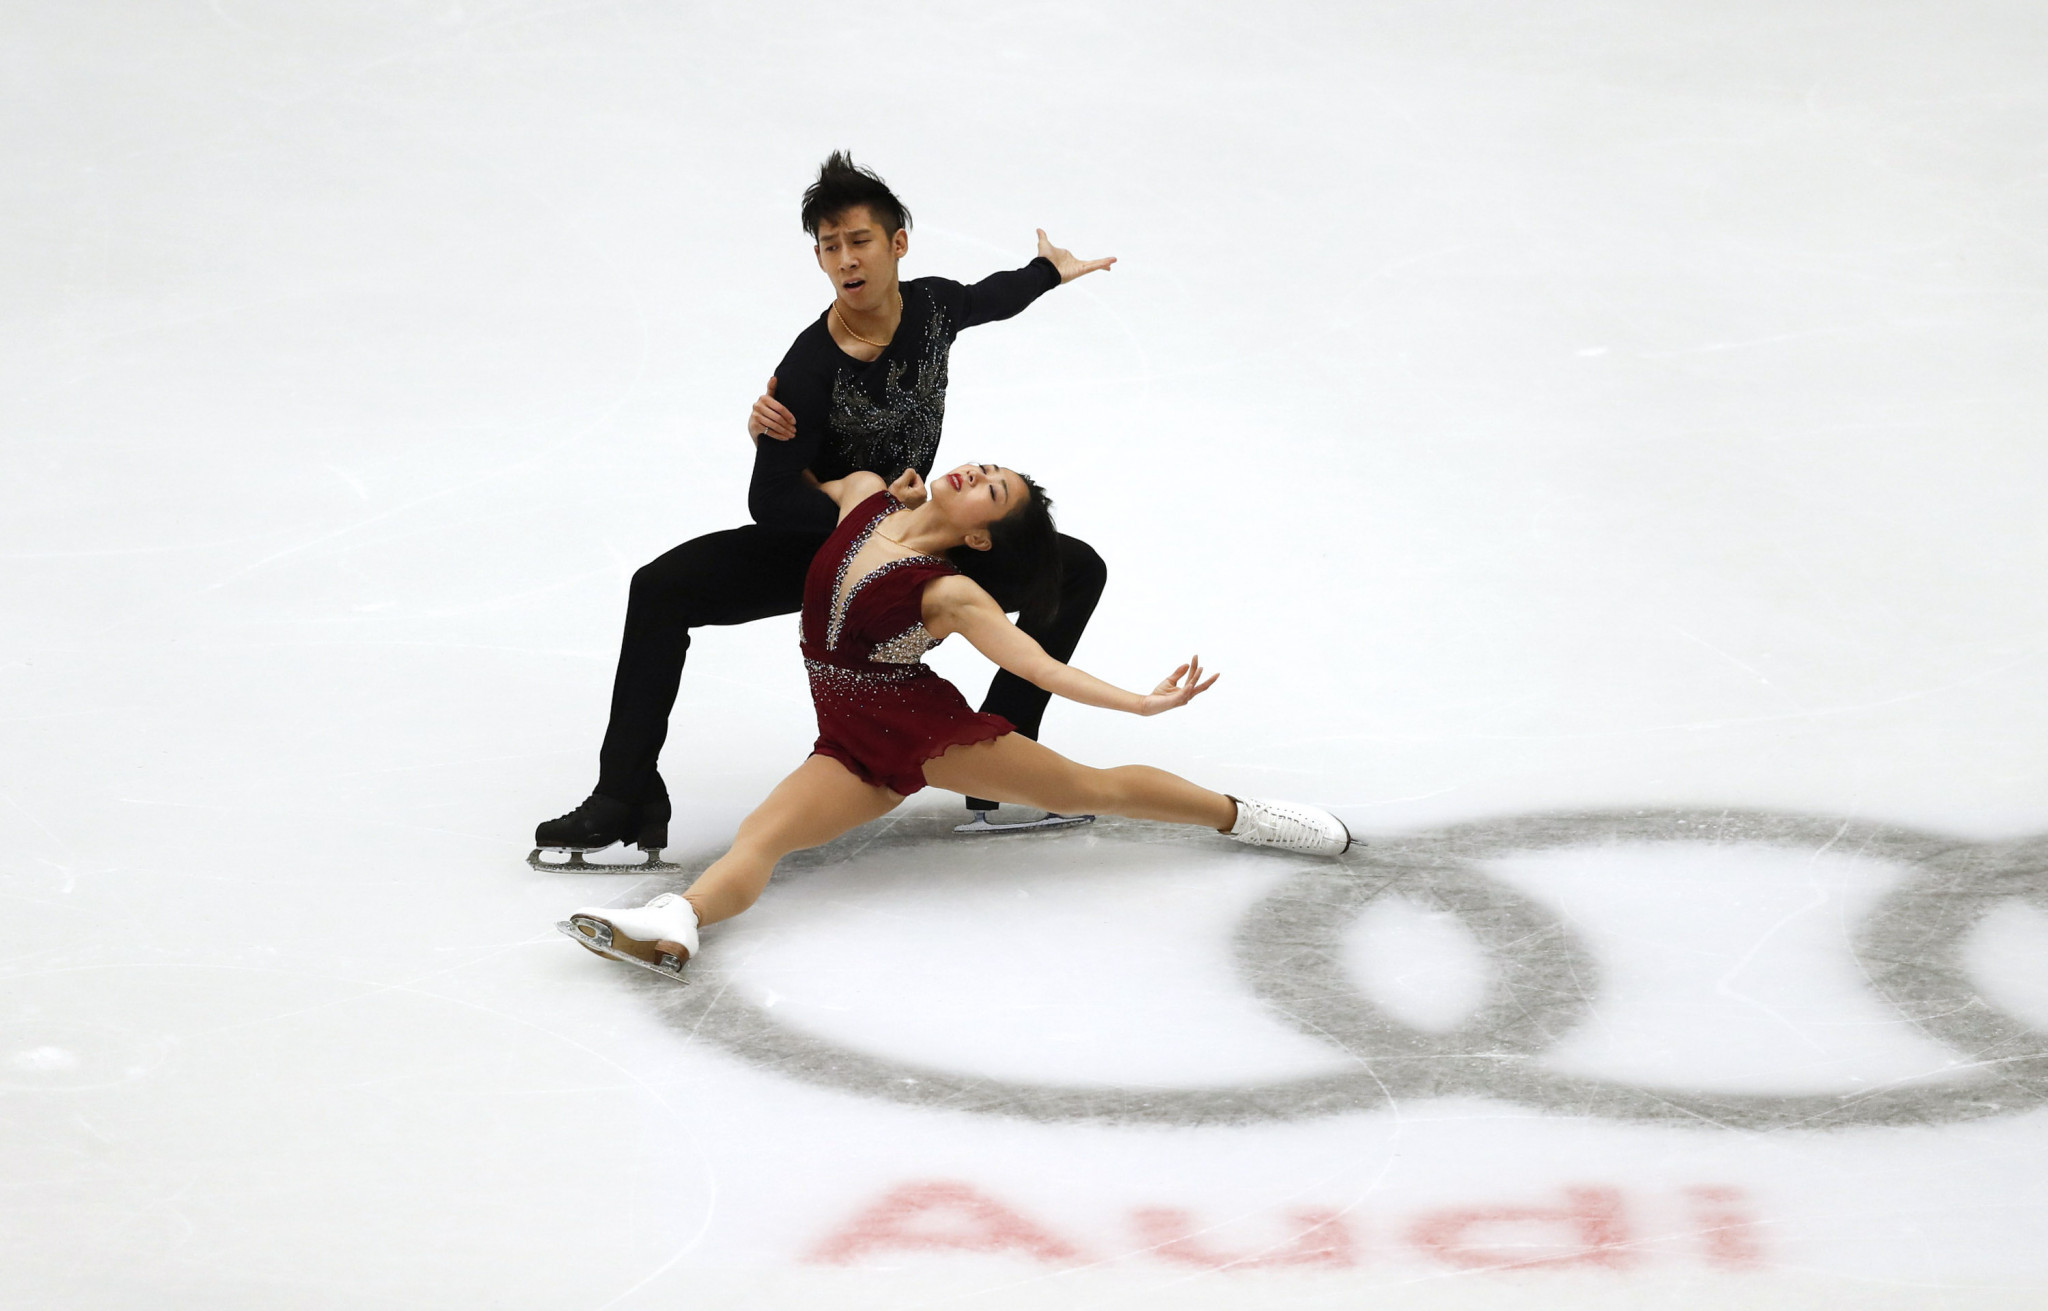 Reigning world pairs champions Wenjing Sui and Cong Han of China are the leaders in the pairs event ©Getty Images